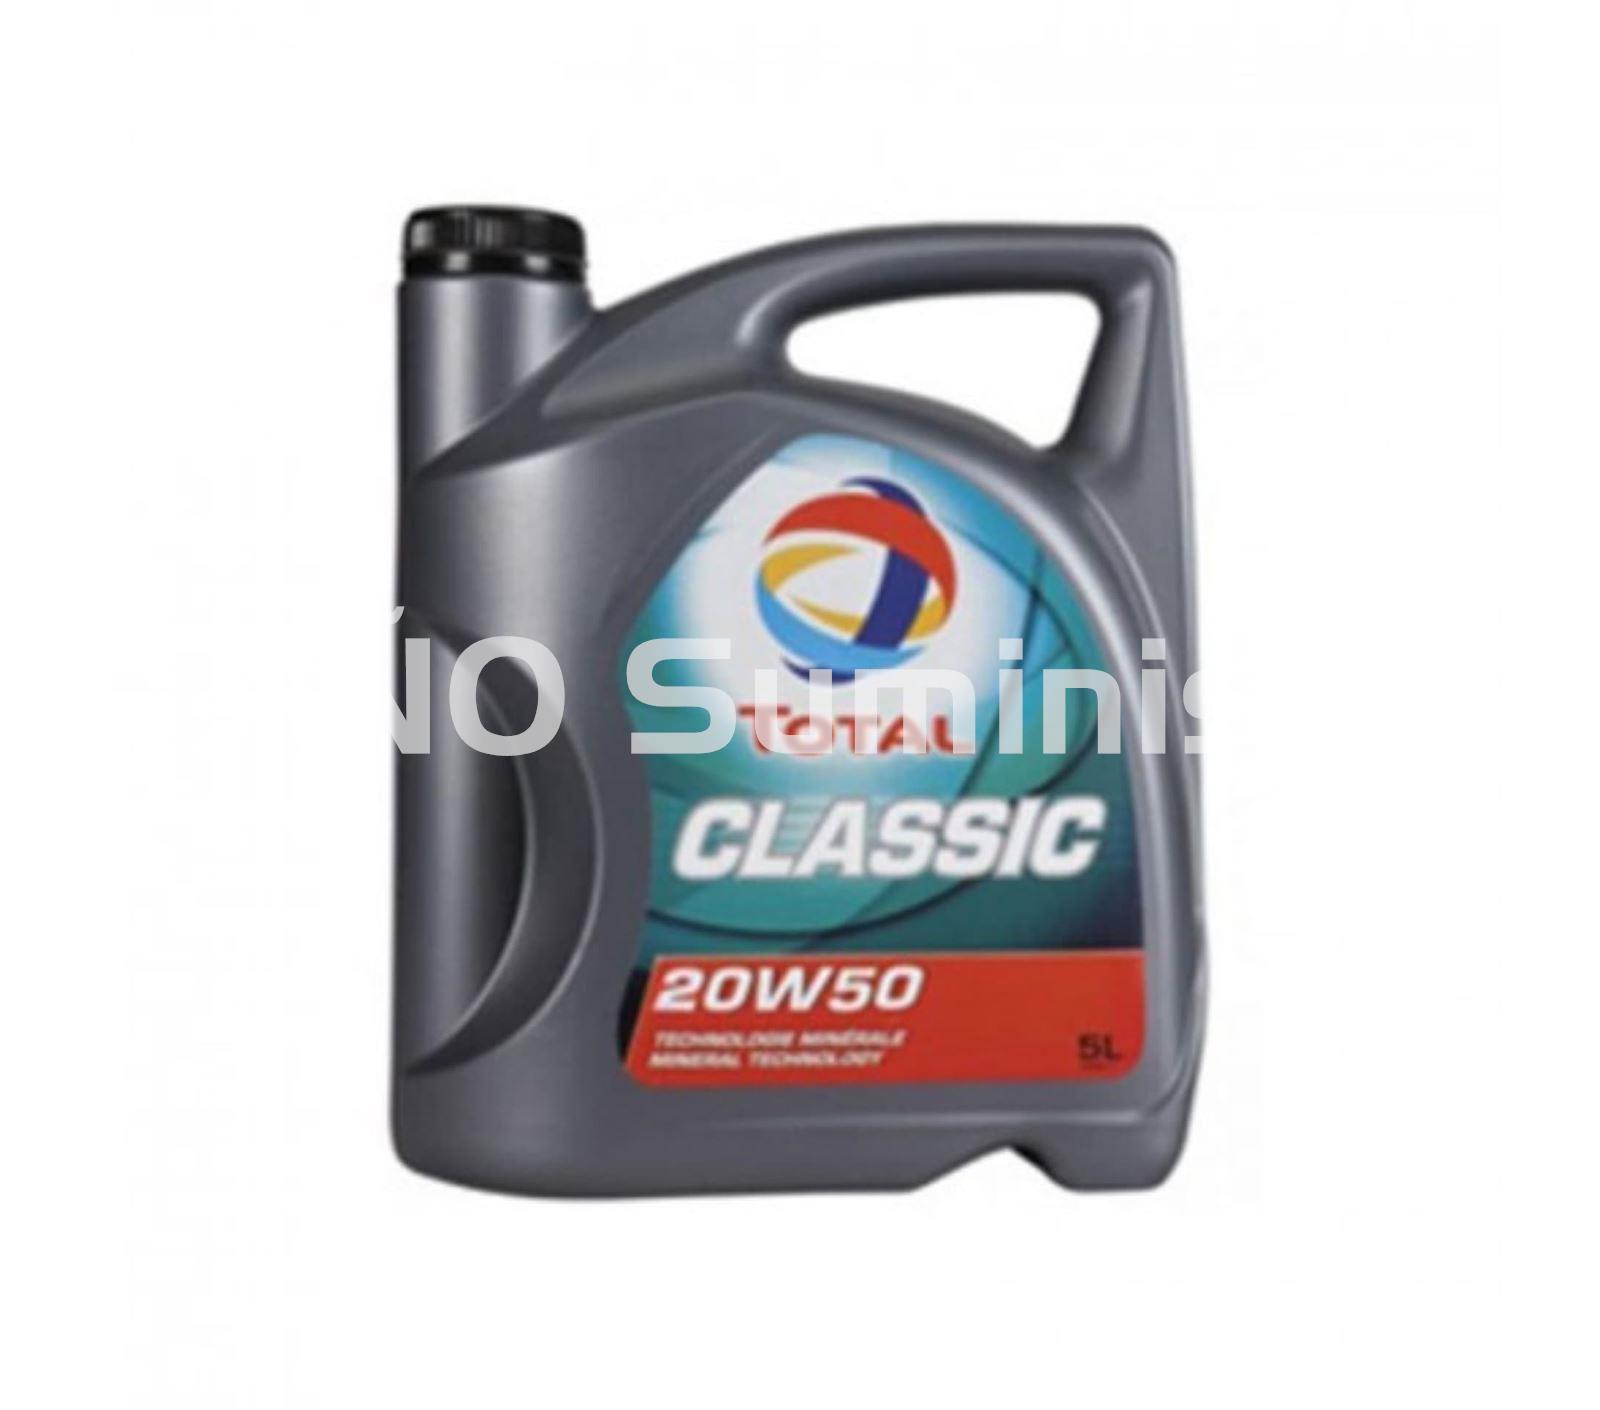 Aceite Total Classic 20w50 - Imagen 1